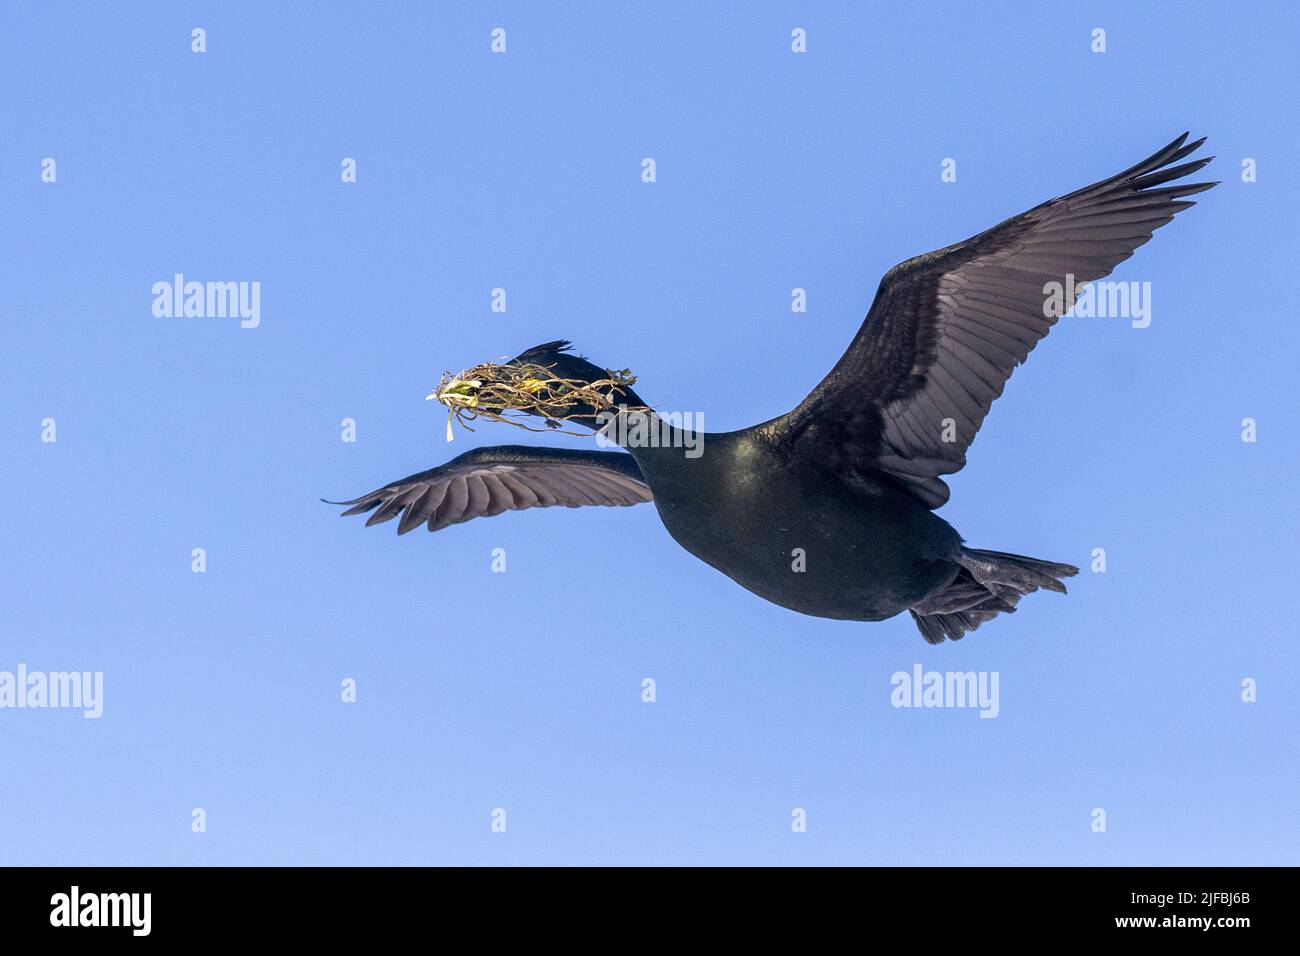 Norway, Varanger Fjord, Vardø or Vardo, Island of Hornøya, protected island with large colonies of seabirds, European shag or common shag (Phalacrocorax aristotelis), in flight with material for the nest building ( seeweeds) Stock Photo